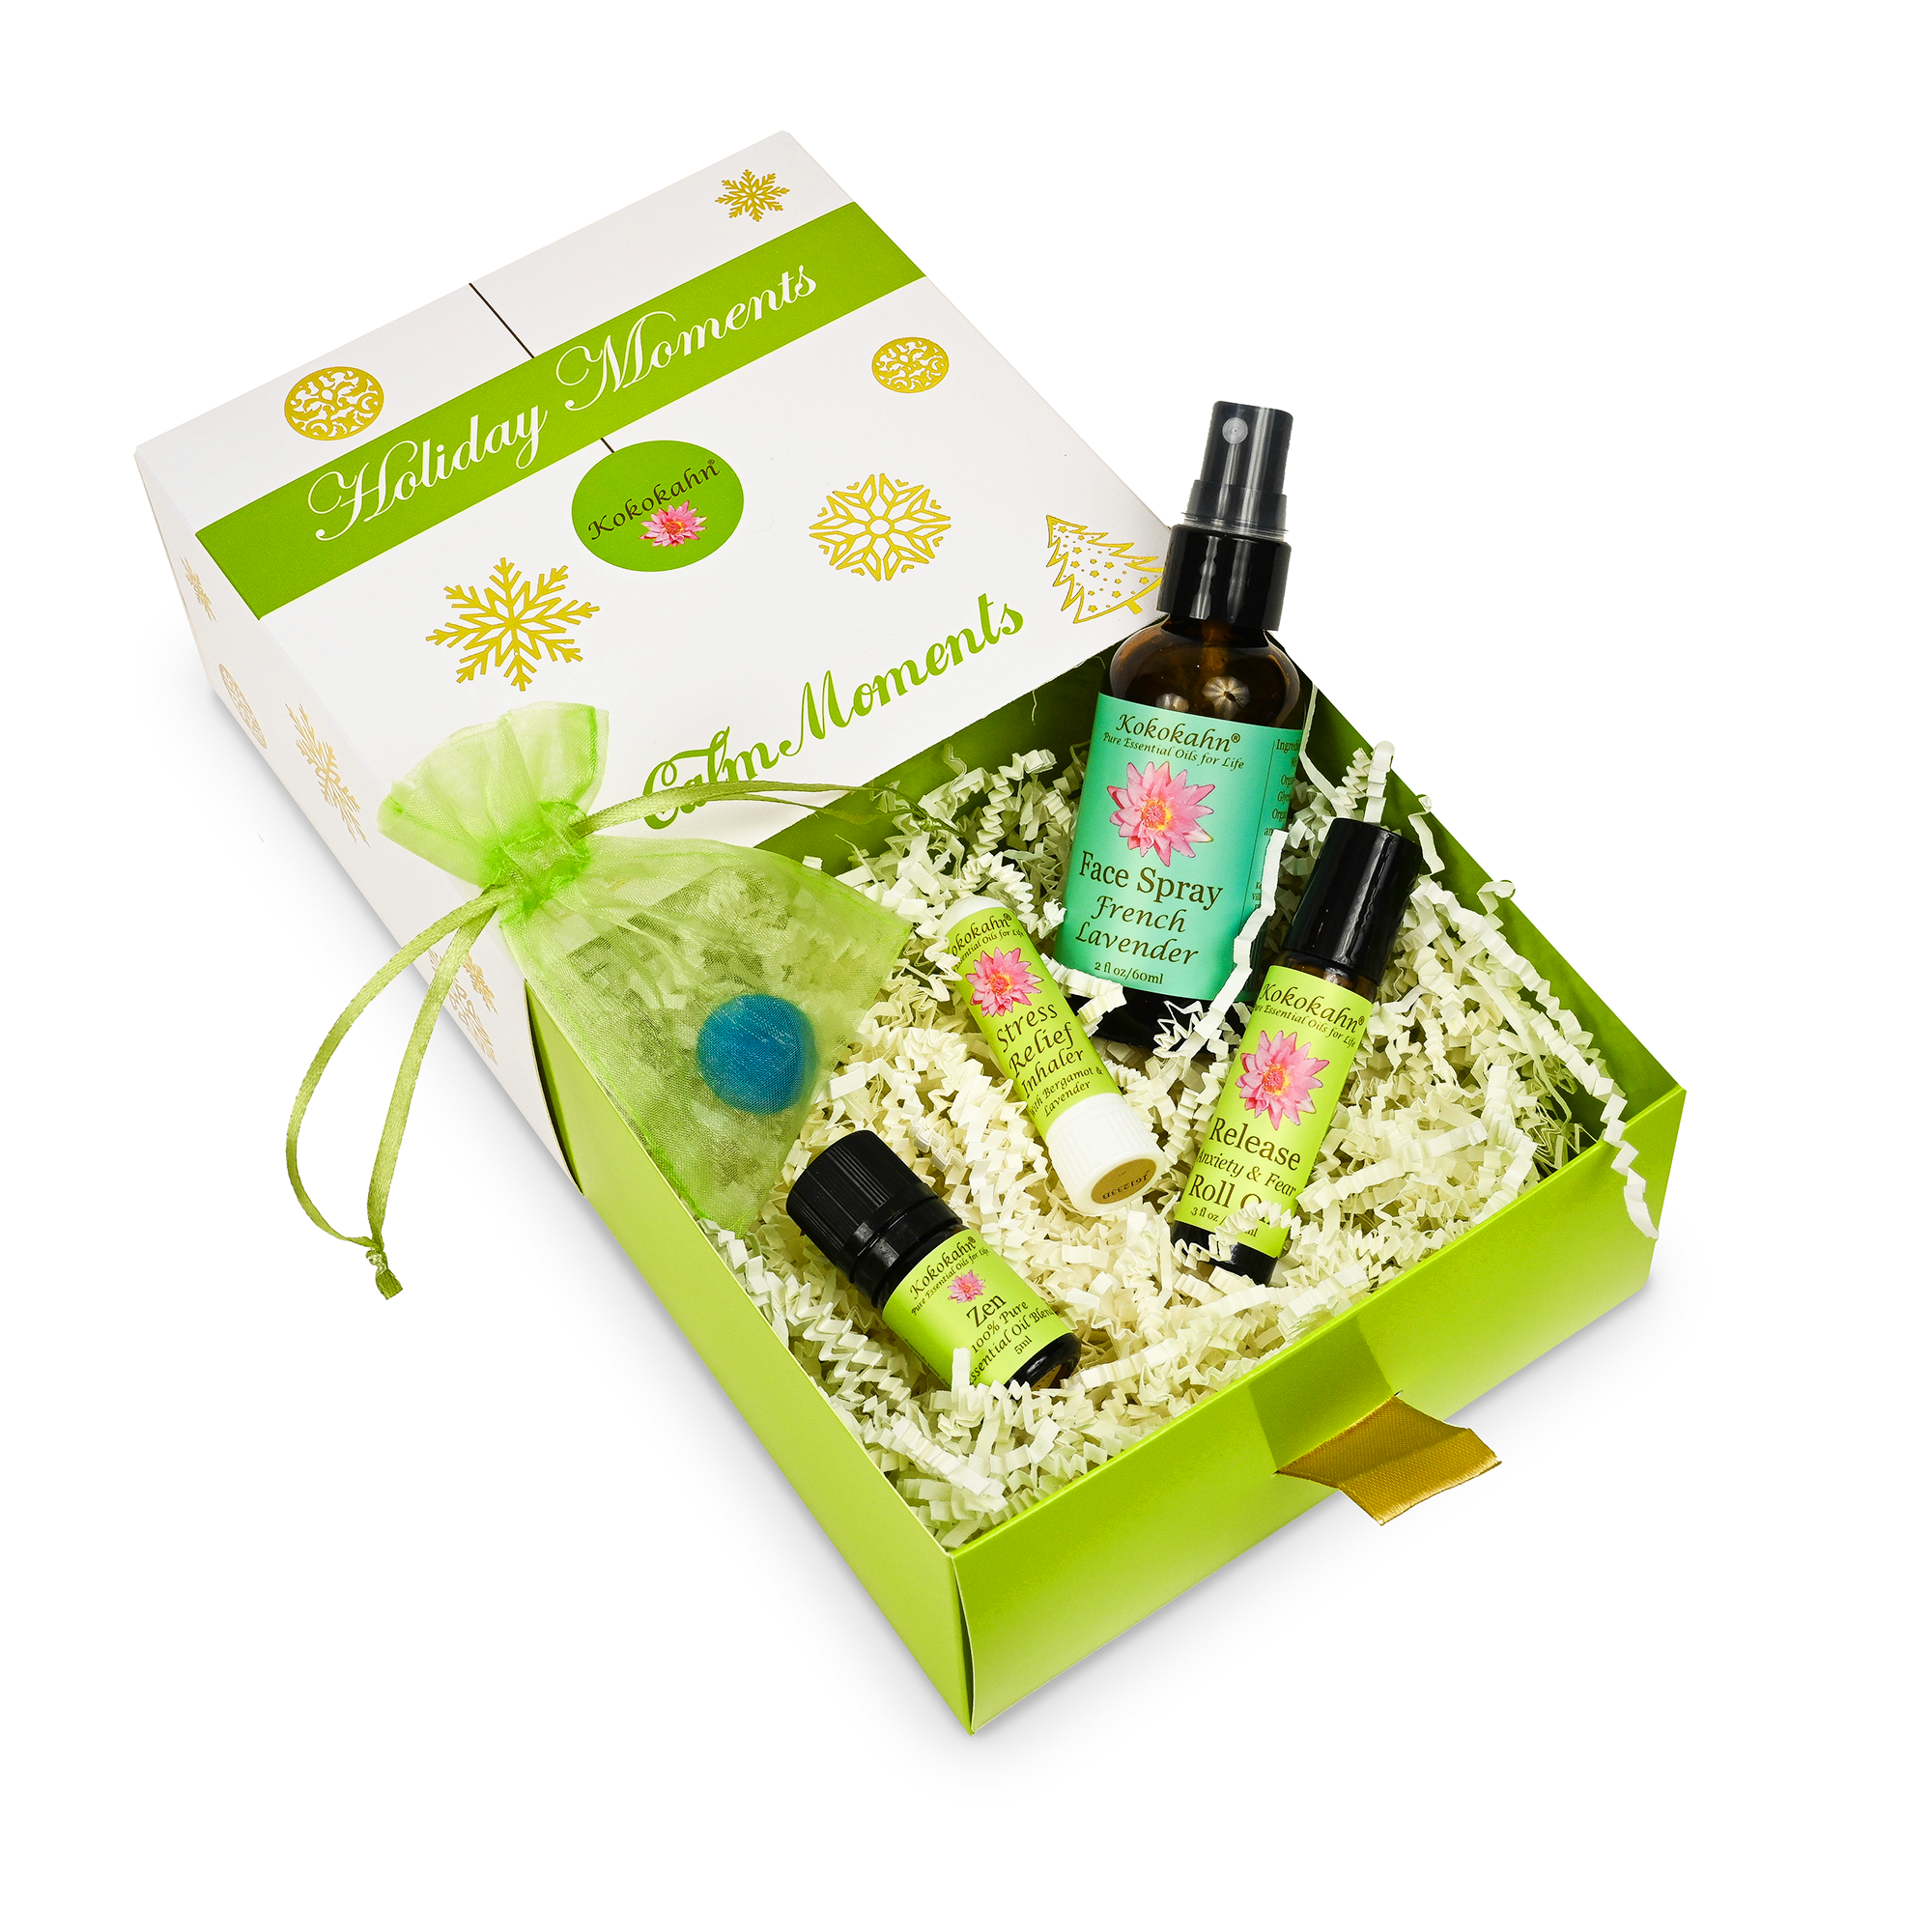 Pure Essential Oils and Aromatherapy Products at Kokokahn